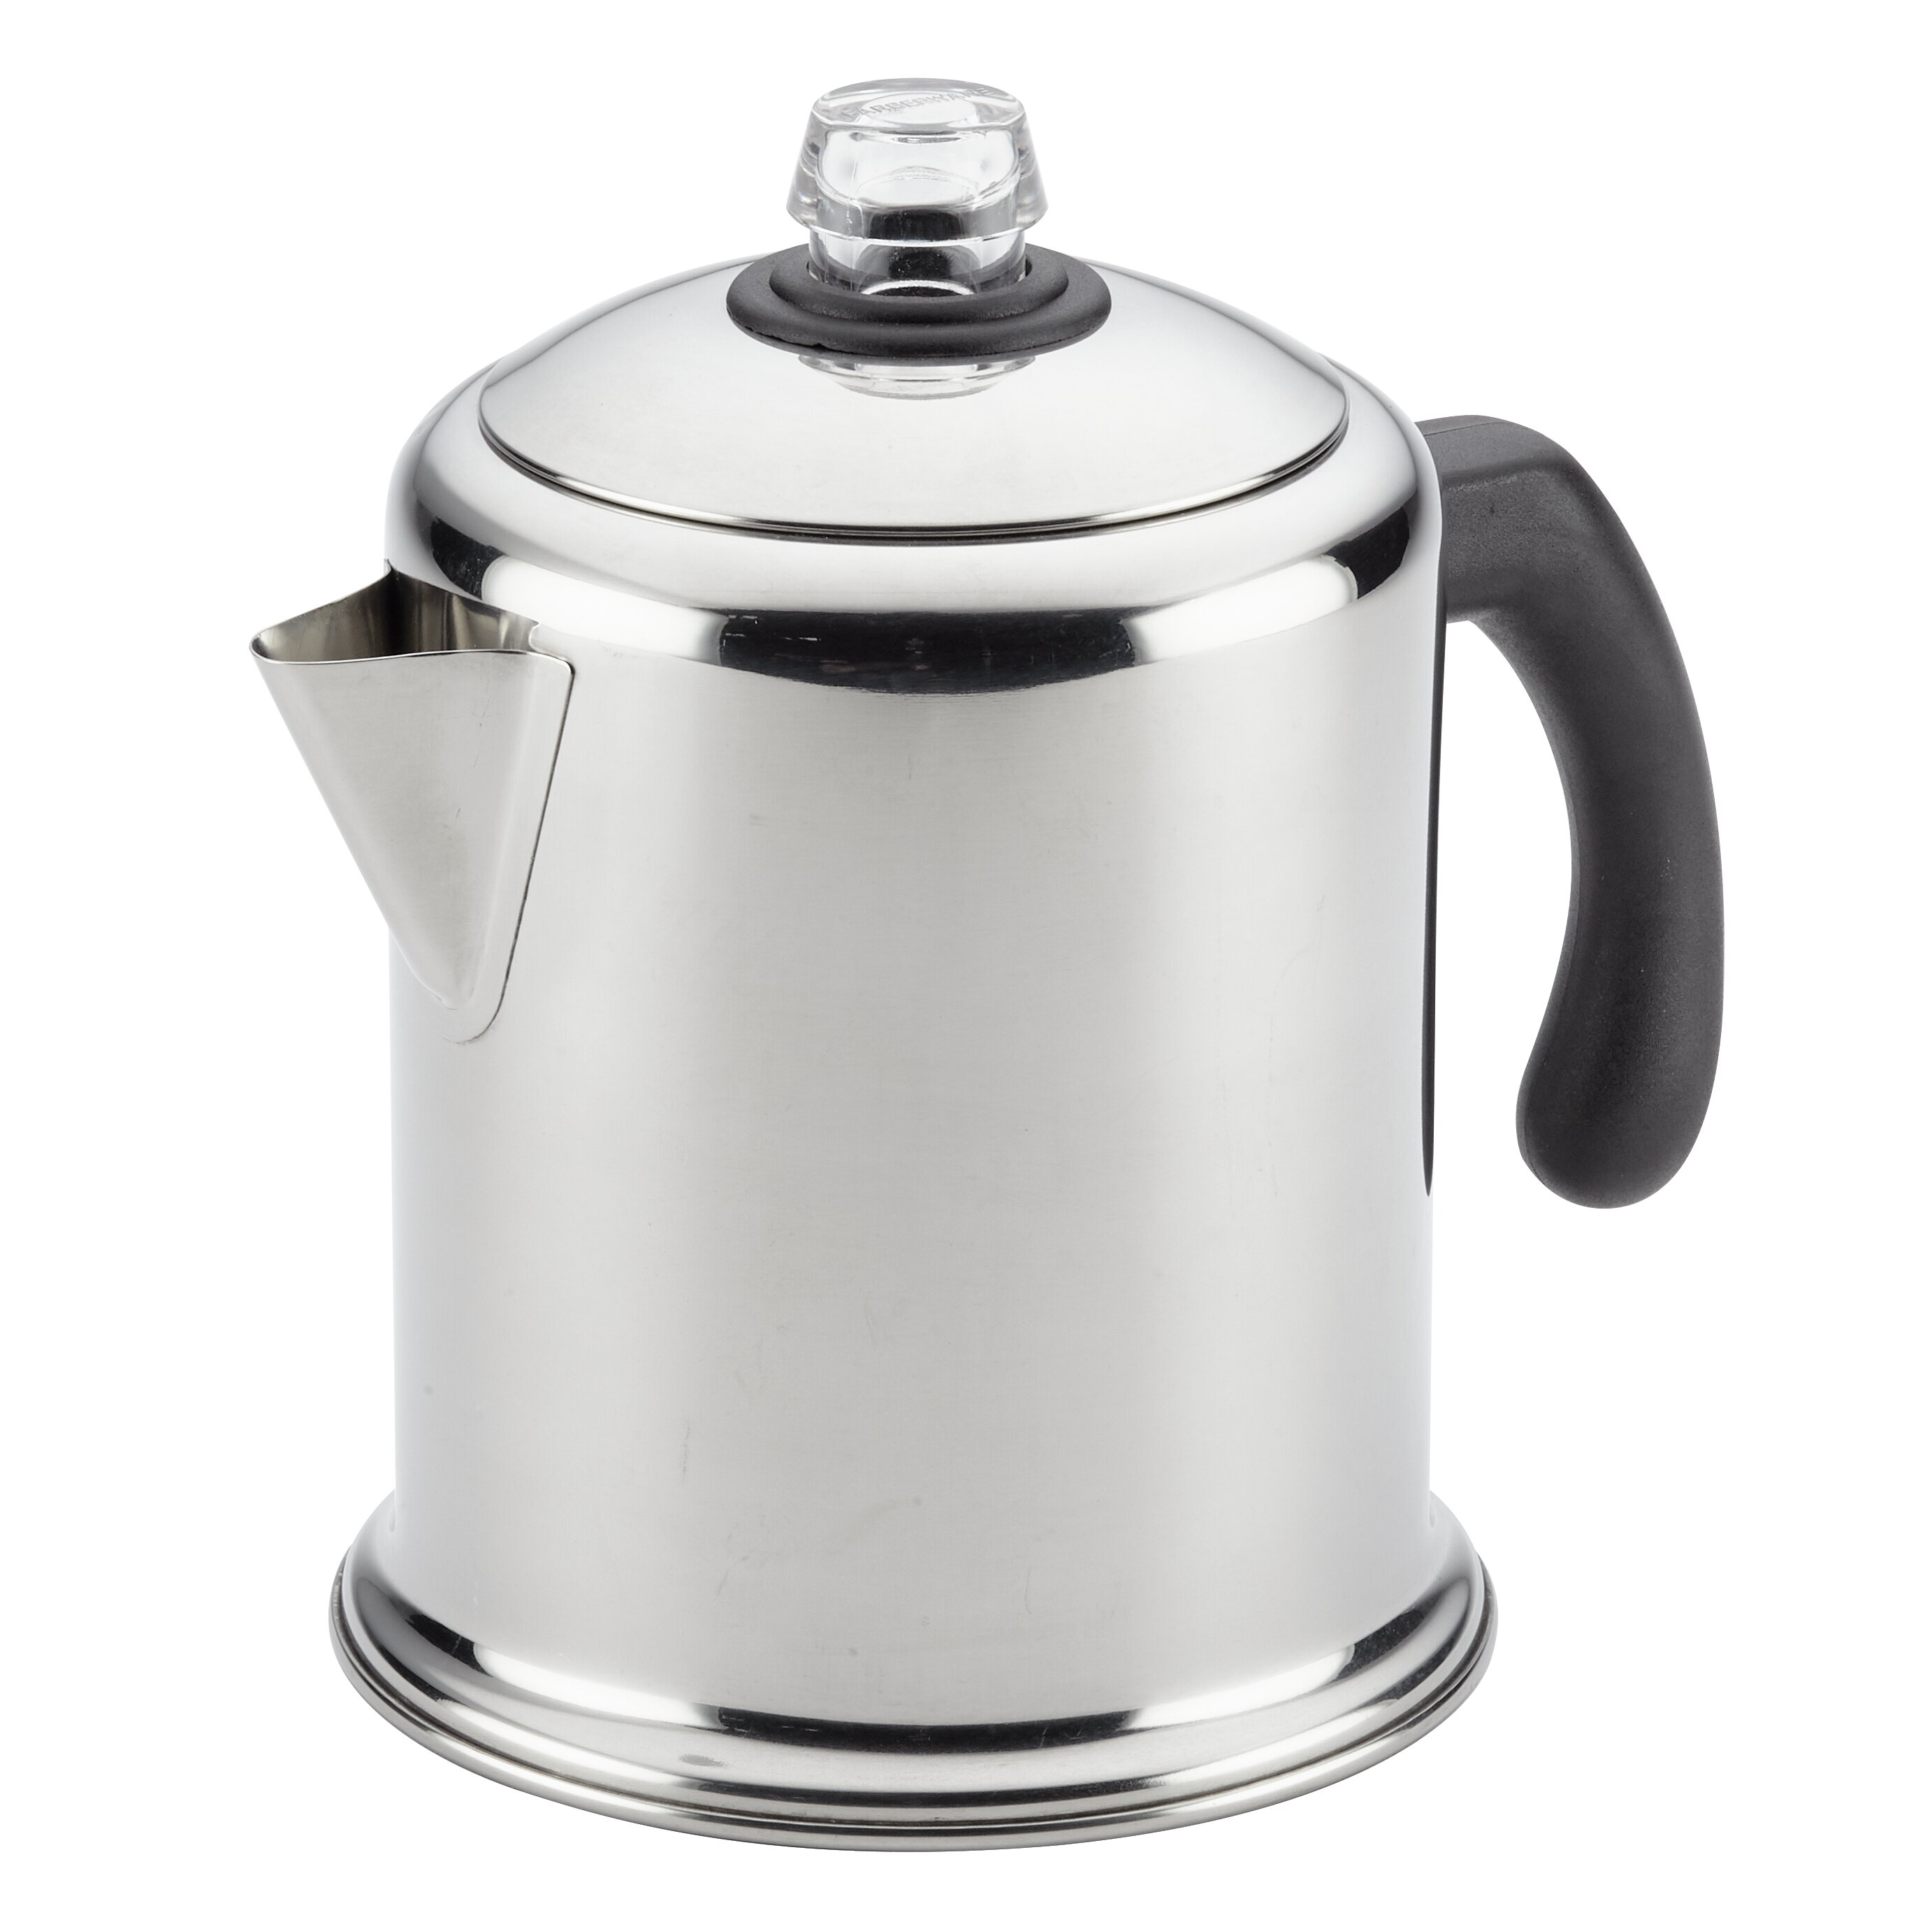 12-Cup Stainless Coffee Cuisinart Percolator, 9-Cup Carafe Warmer Vintage